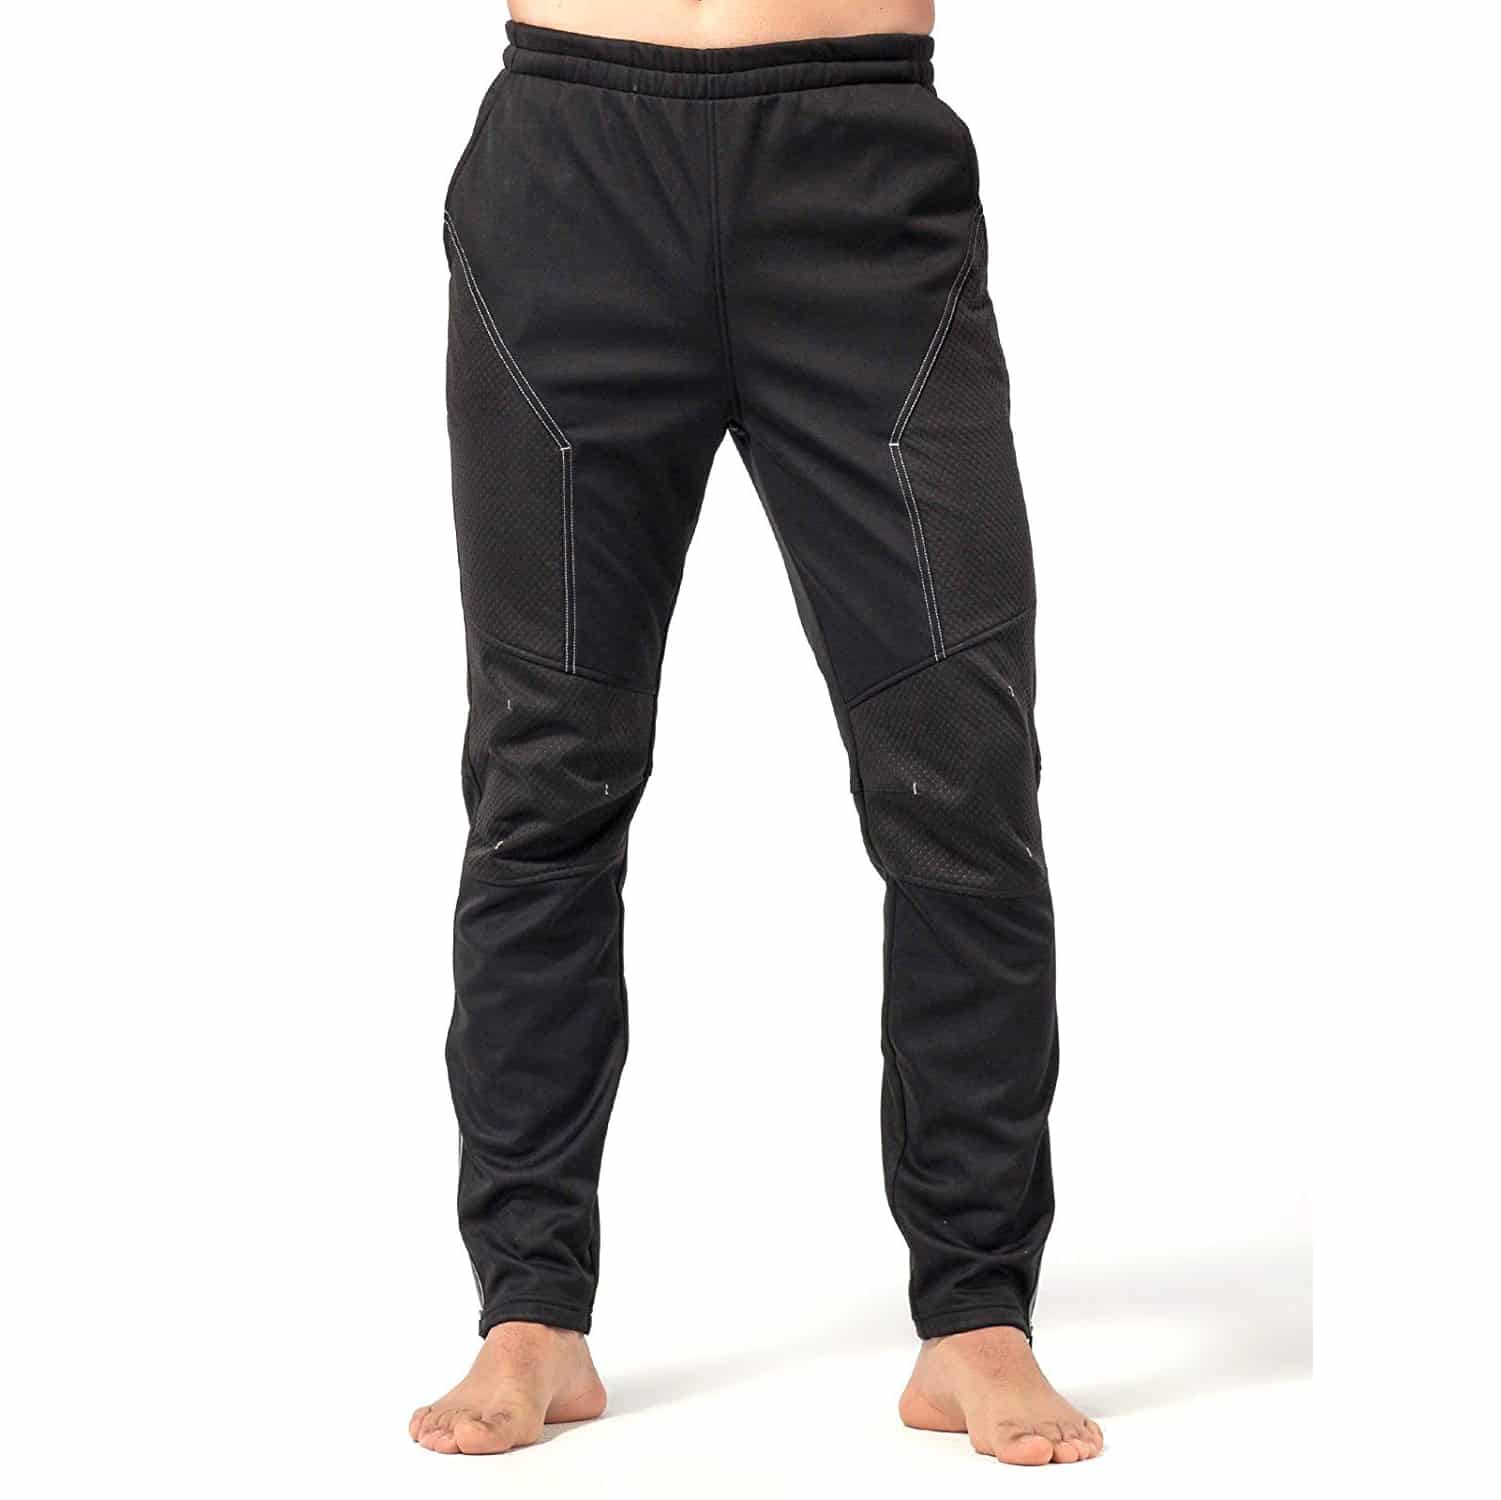 Top 10 Best Bicycle Pants For Men in 2021 Reviews Buyer’s Guide